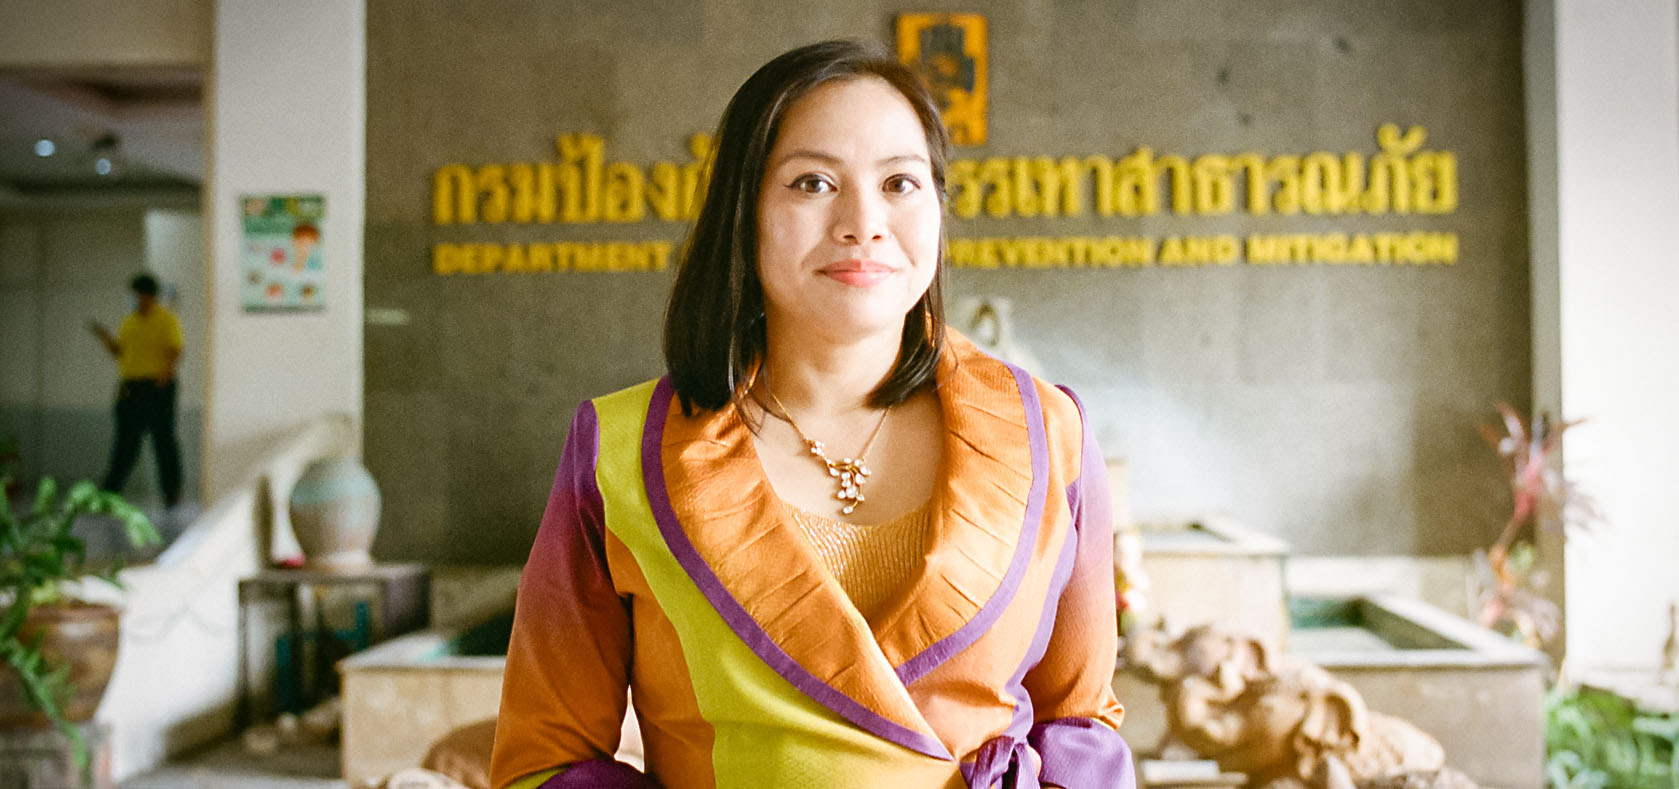 Aimee is the director of International Cooperation Section at the Department of Disaster Prevention and Mitigation (DDPM), Ministry of Interior of Thailand. Photo: UN Women